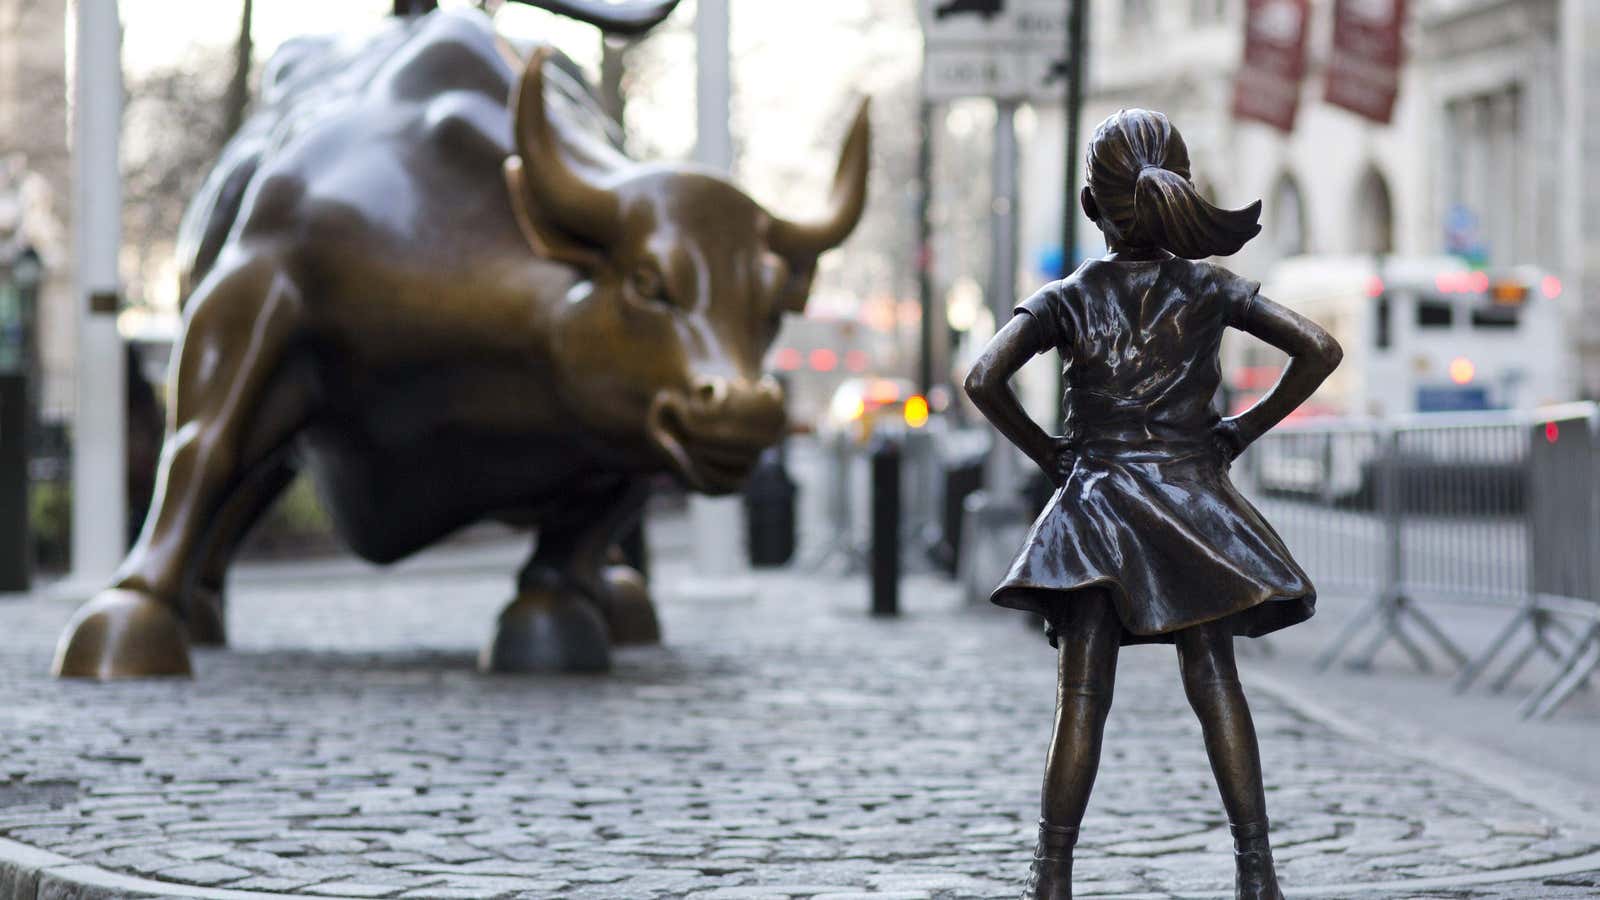 In this March 22, 2017 photo, the Charging Bull and Fearless Girl statues are sit on Lower Broadway in New York. Since 1989 the bronze…